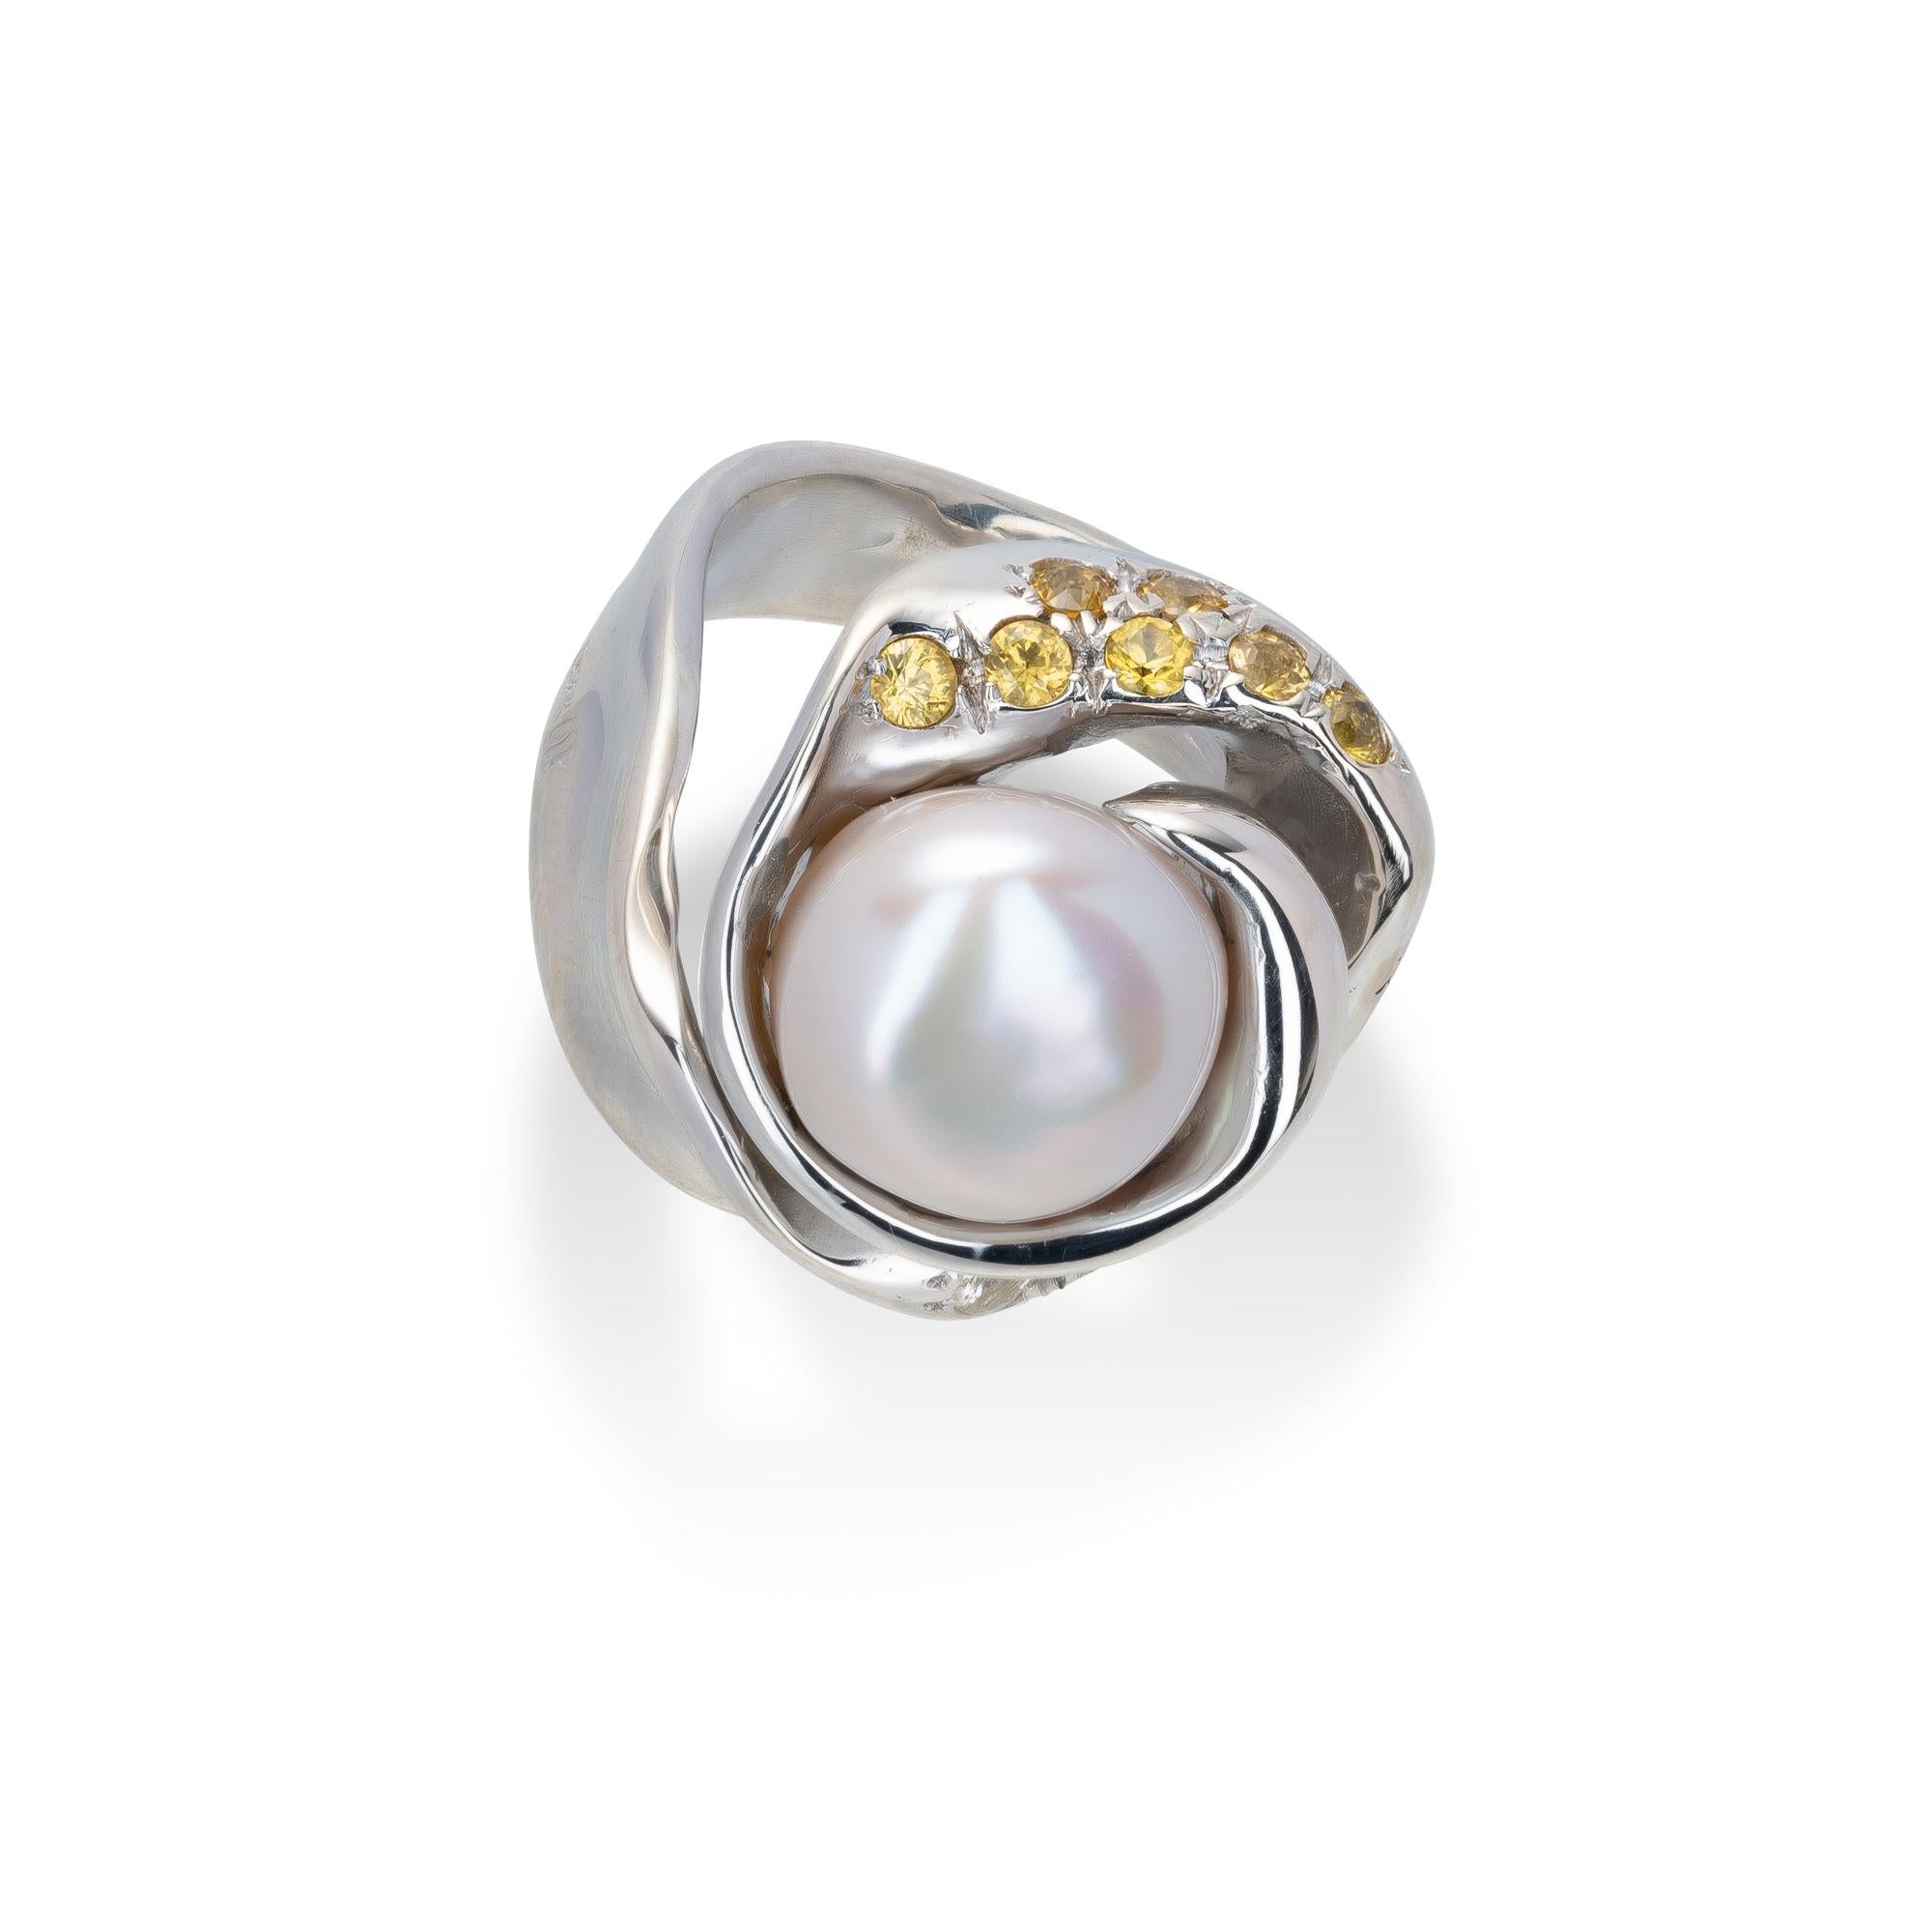 A Ring from d'Avossa Rêves d'Argent Collection in silver 925 ‰ with a 13,26 cts Central  fresh water Pearl,  enriched with a pavé of 0,62 cts Yellow Sapphire and 0,40 cts White Saphhire. 

Ref. Number AAGP108